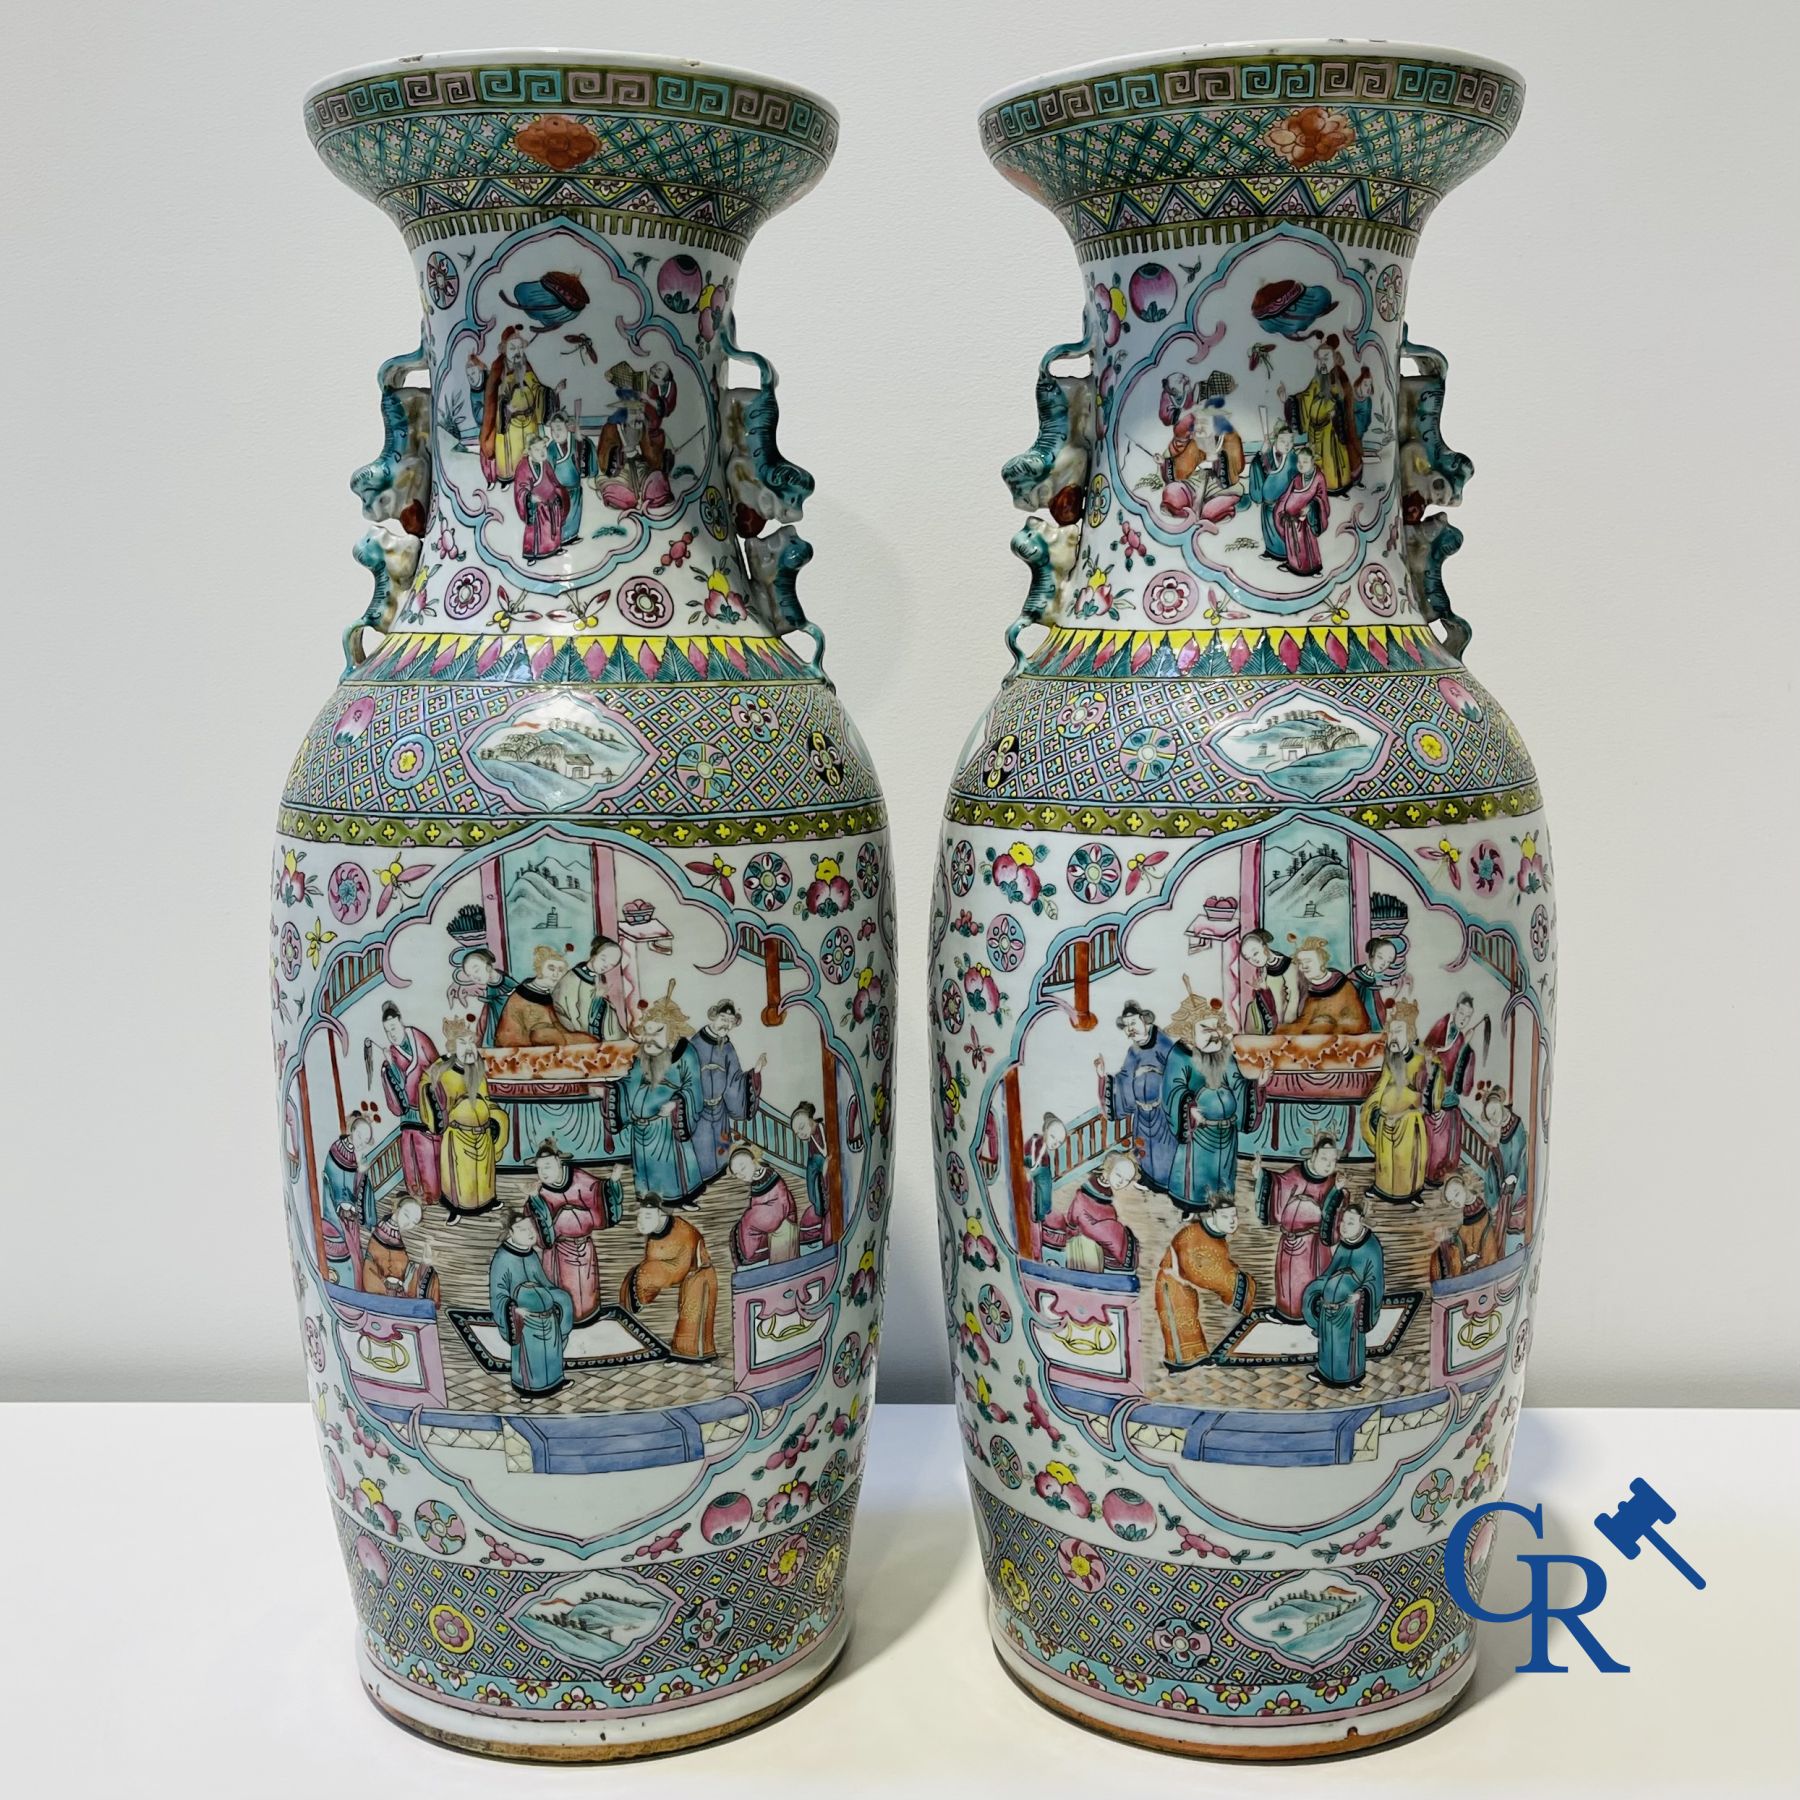 Asian art: Chinese porcelain, a pair of Chinese famille rose vases with court scenes. 19th century.